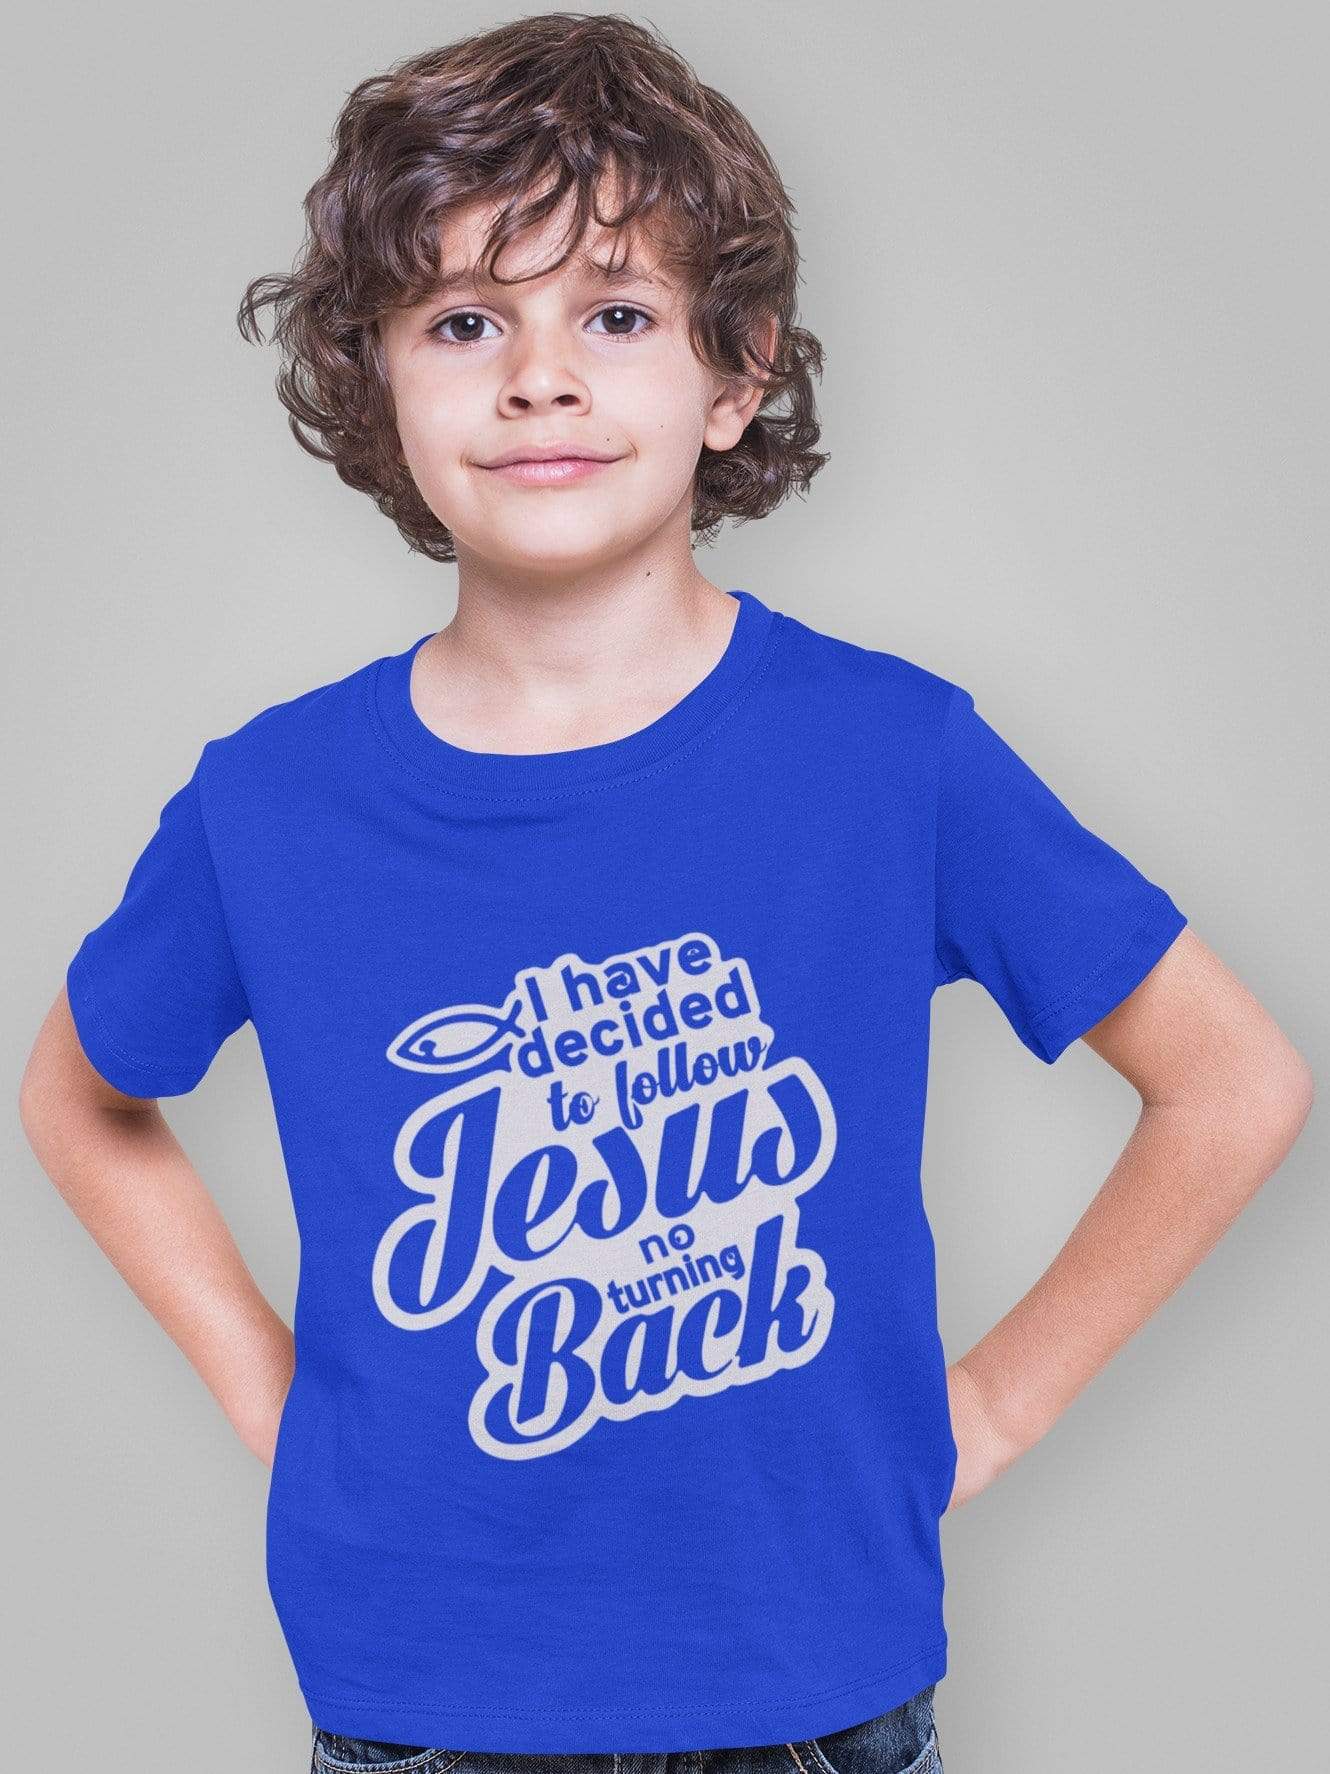 Living Words Kids Round Neck T Shirt Boy / 0-12 Mn / Royal Blue I have decided to follow Jesus